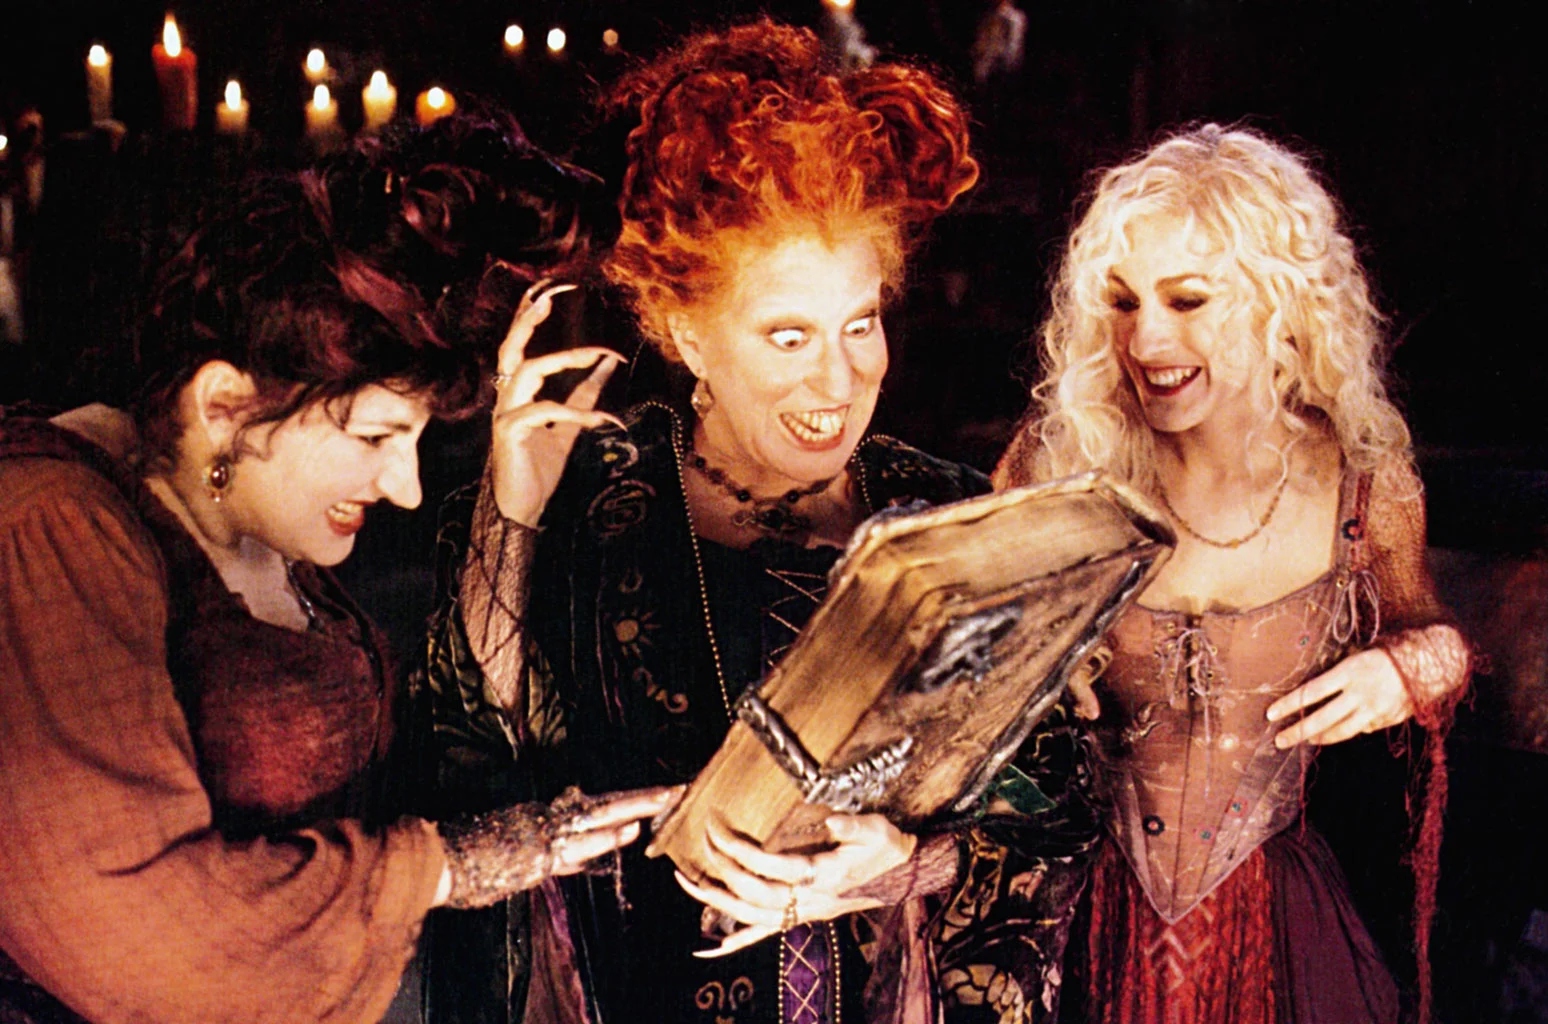 Hocus Pocus Spells - Some Spells From The Famous Movie